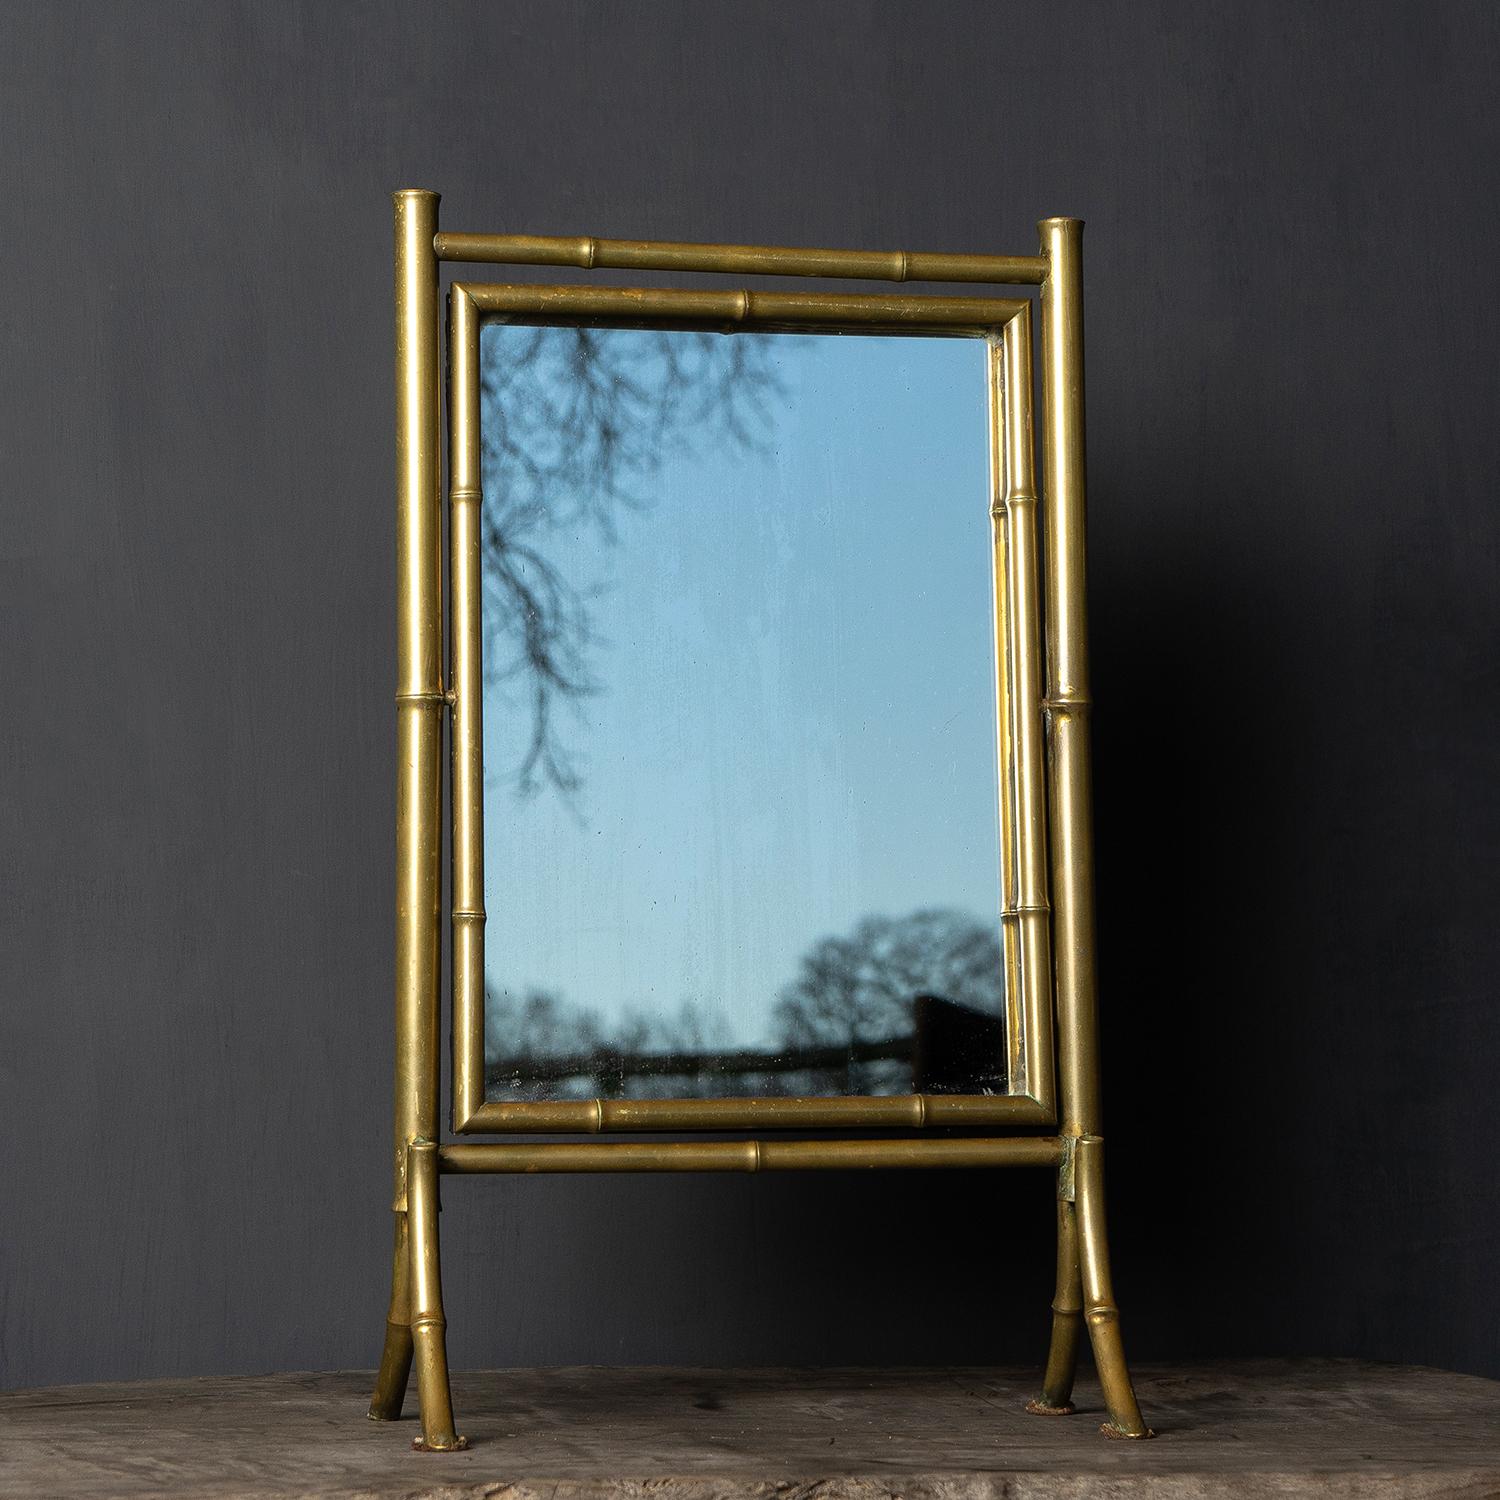 ANTIQUE EASEL TABLE TOP MIRROR
Simple and elegant naturalistic frame in the form of bamboo.

Dating from the late Victorian/Edwardian period.

It is in very good vintage condition with only minor wear commensurate with age

Measuring 52cm high x